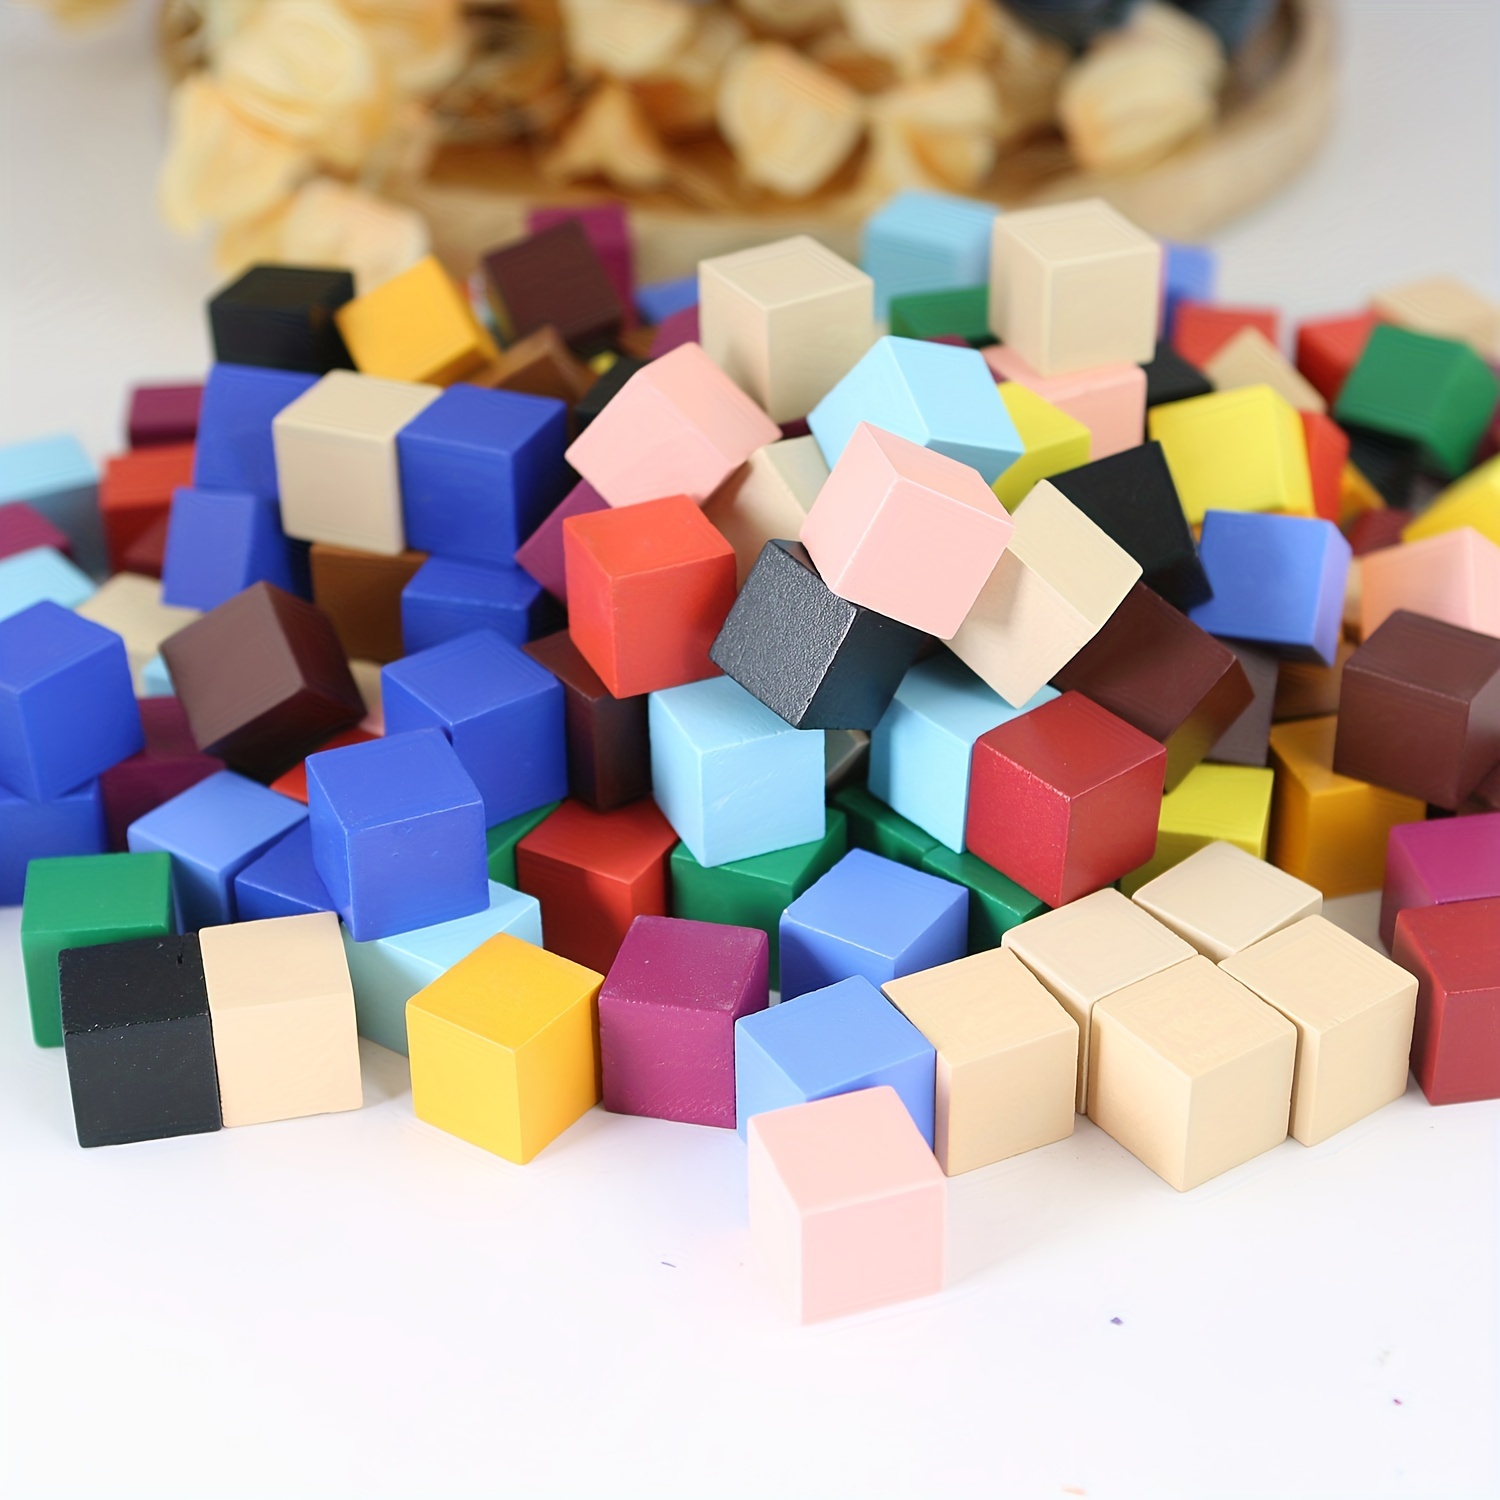 2 Meeple - Choose your color (2 inches tall)